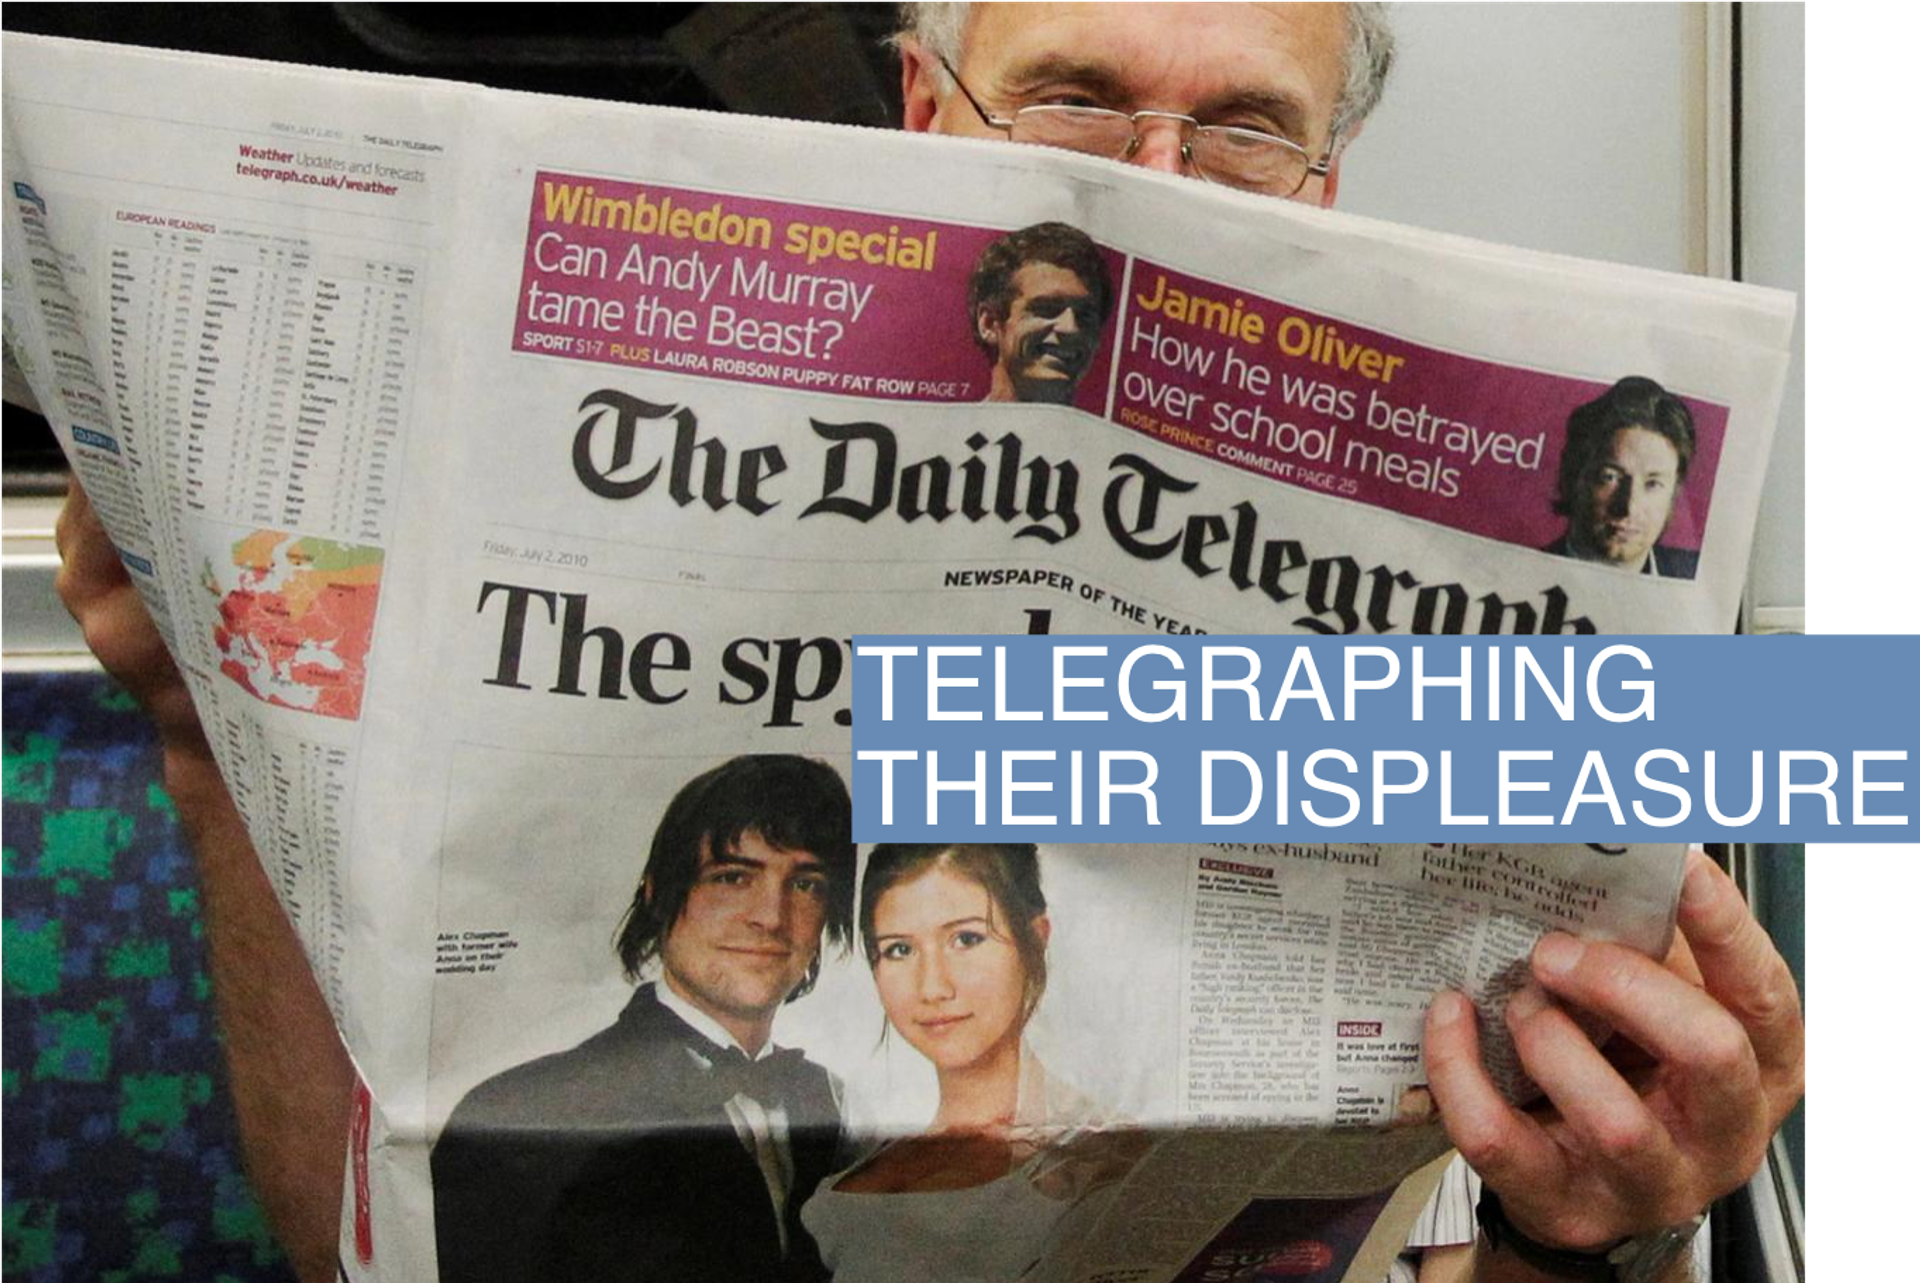 A passenger reads the Daily Telegraph newspaper, featuring a front page interview with the ex-husband of accused Russian spy Anna Chapman, on the underground in London July 2, 2010. REUTERS/Luke MacGregor/File Photo